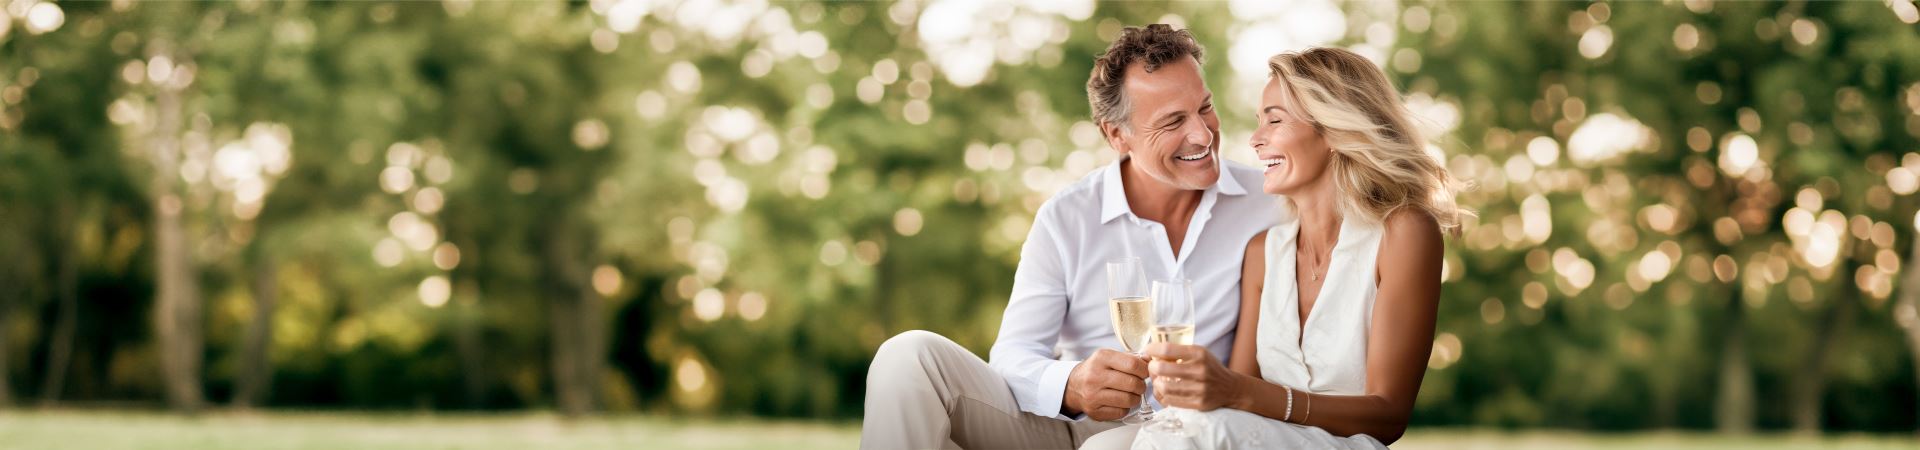  This photo shows a couple—a man and a woman—sitting and smiling at each other. They are both holding a glass of champagne in their hands. The background consists of trees and abundant greenery.